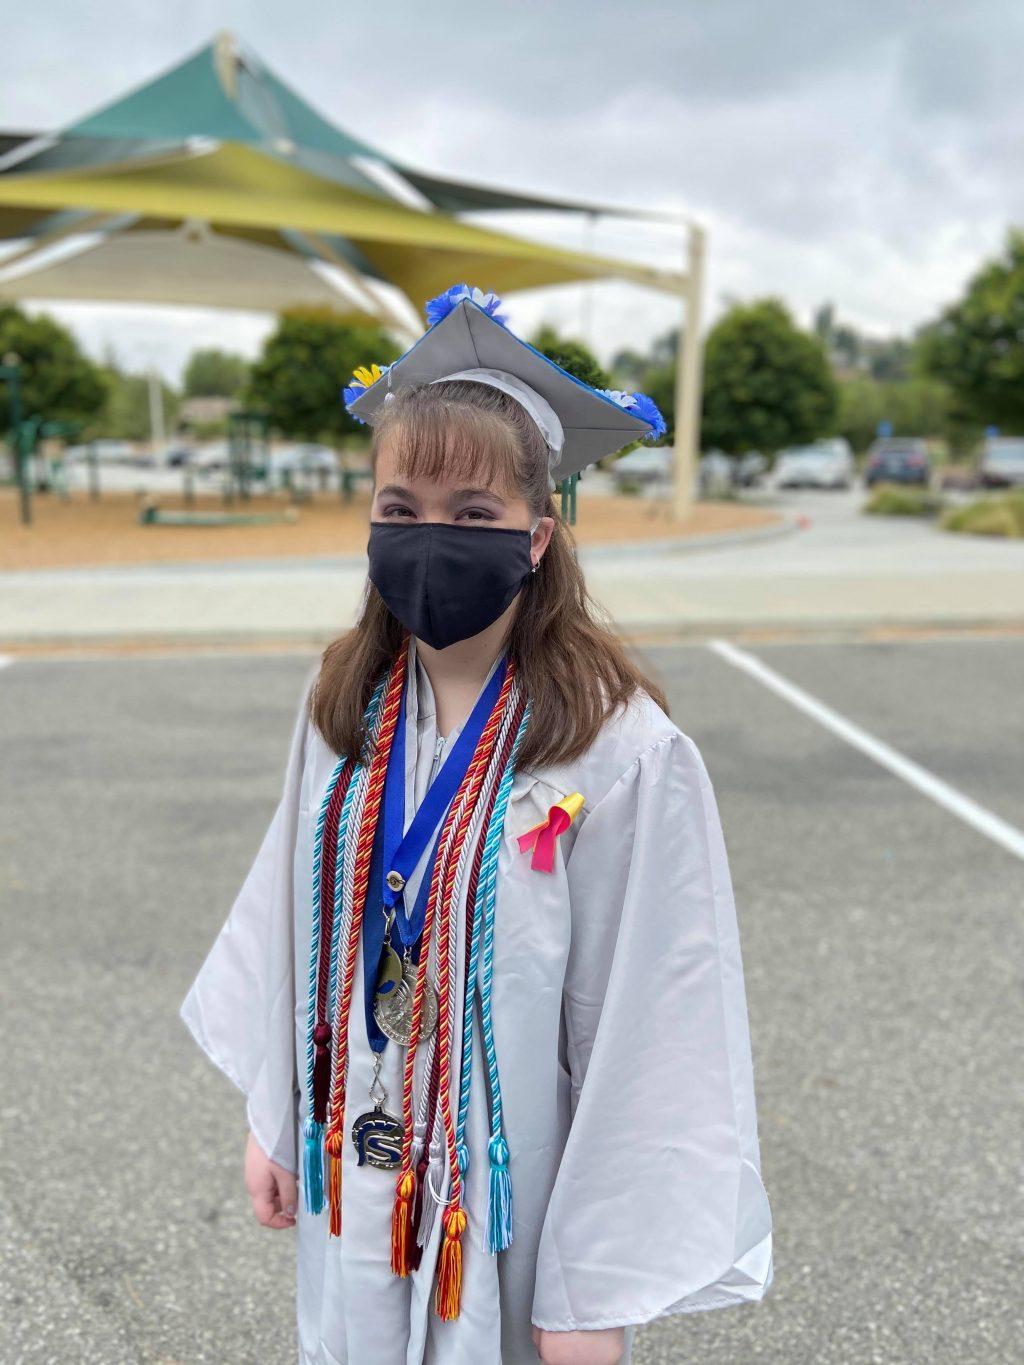 Then-high-school-senior Navia masks up before entering her socially-distant graduation ceremony from her Santa Clarita high school. Students were able to walk through the ceremony but were required to abide by COVID-19 restrictions.